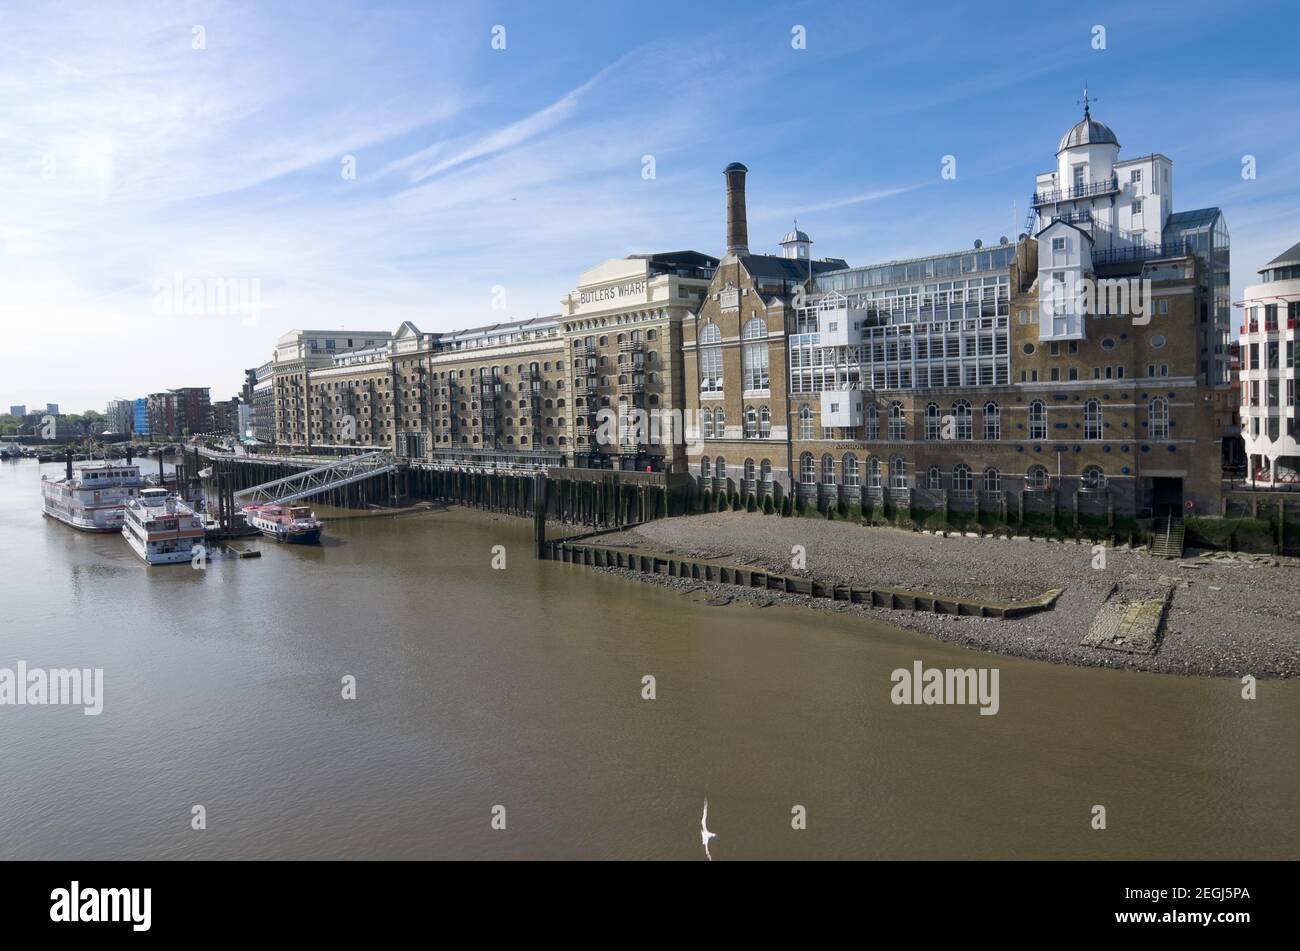 LONDON, ENGLAND - MAY 26: Since the 1980s, Butler's Wharf has been transformed from a derelict site on the River Thames into luxury flats, with restau Stock Photo